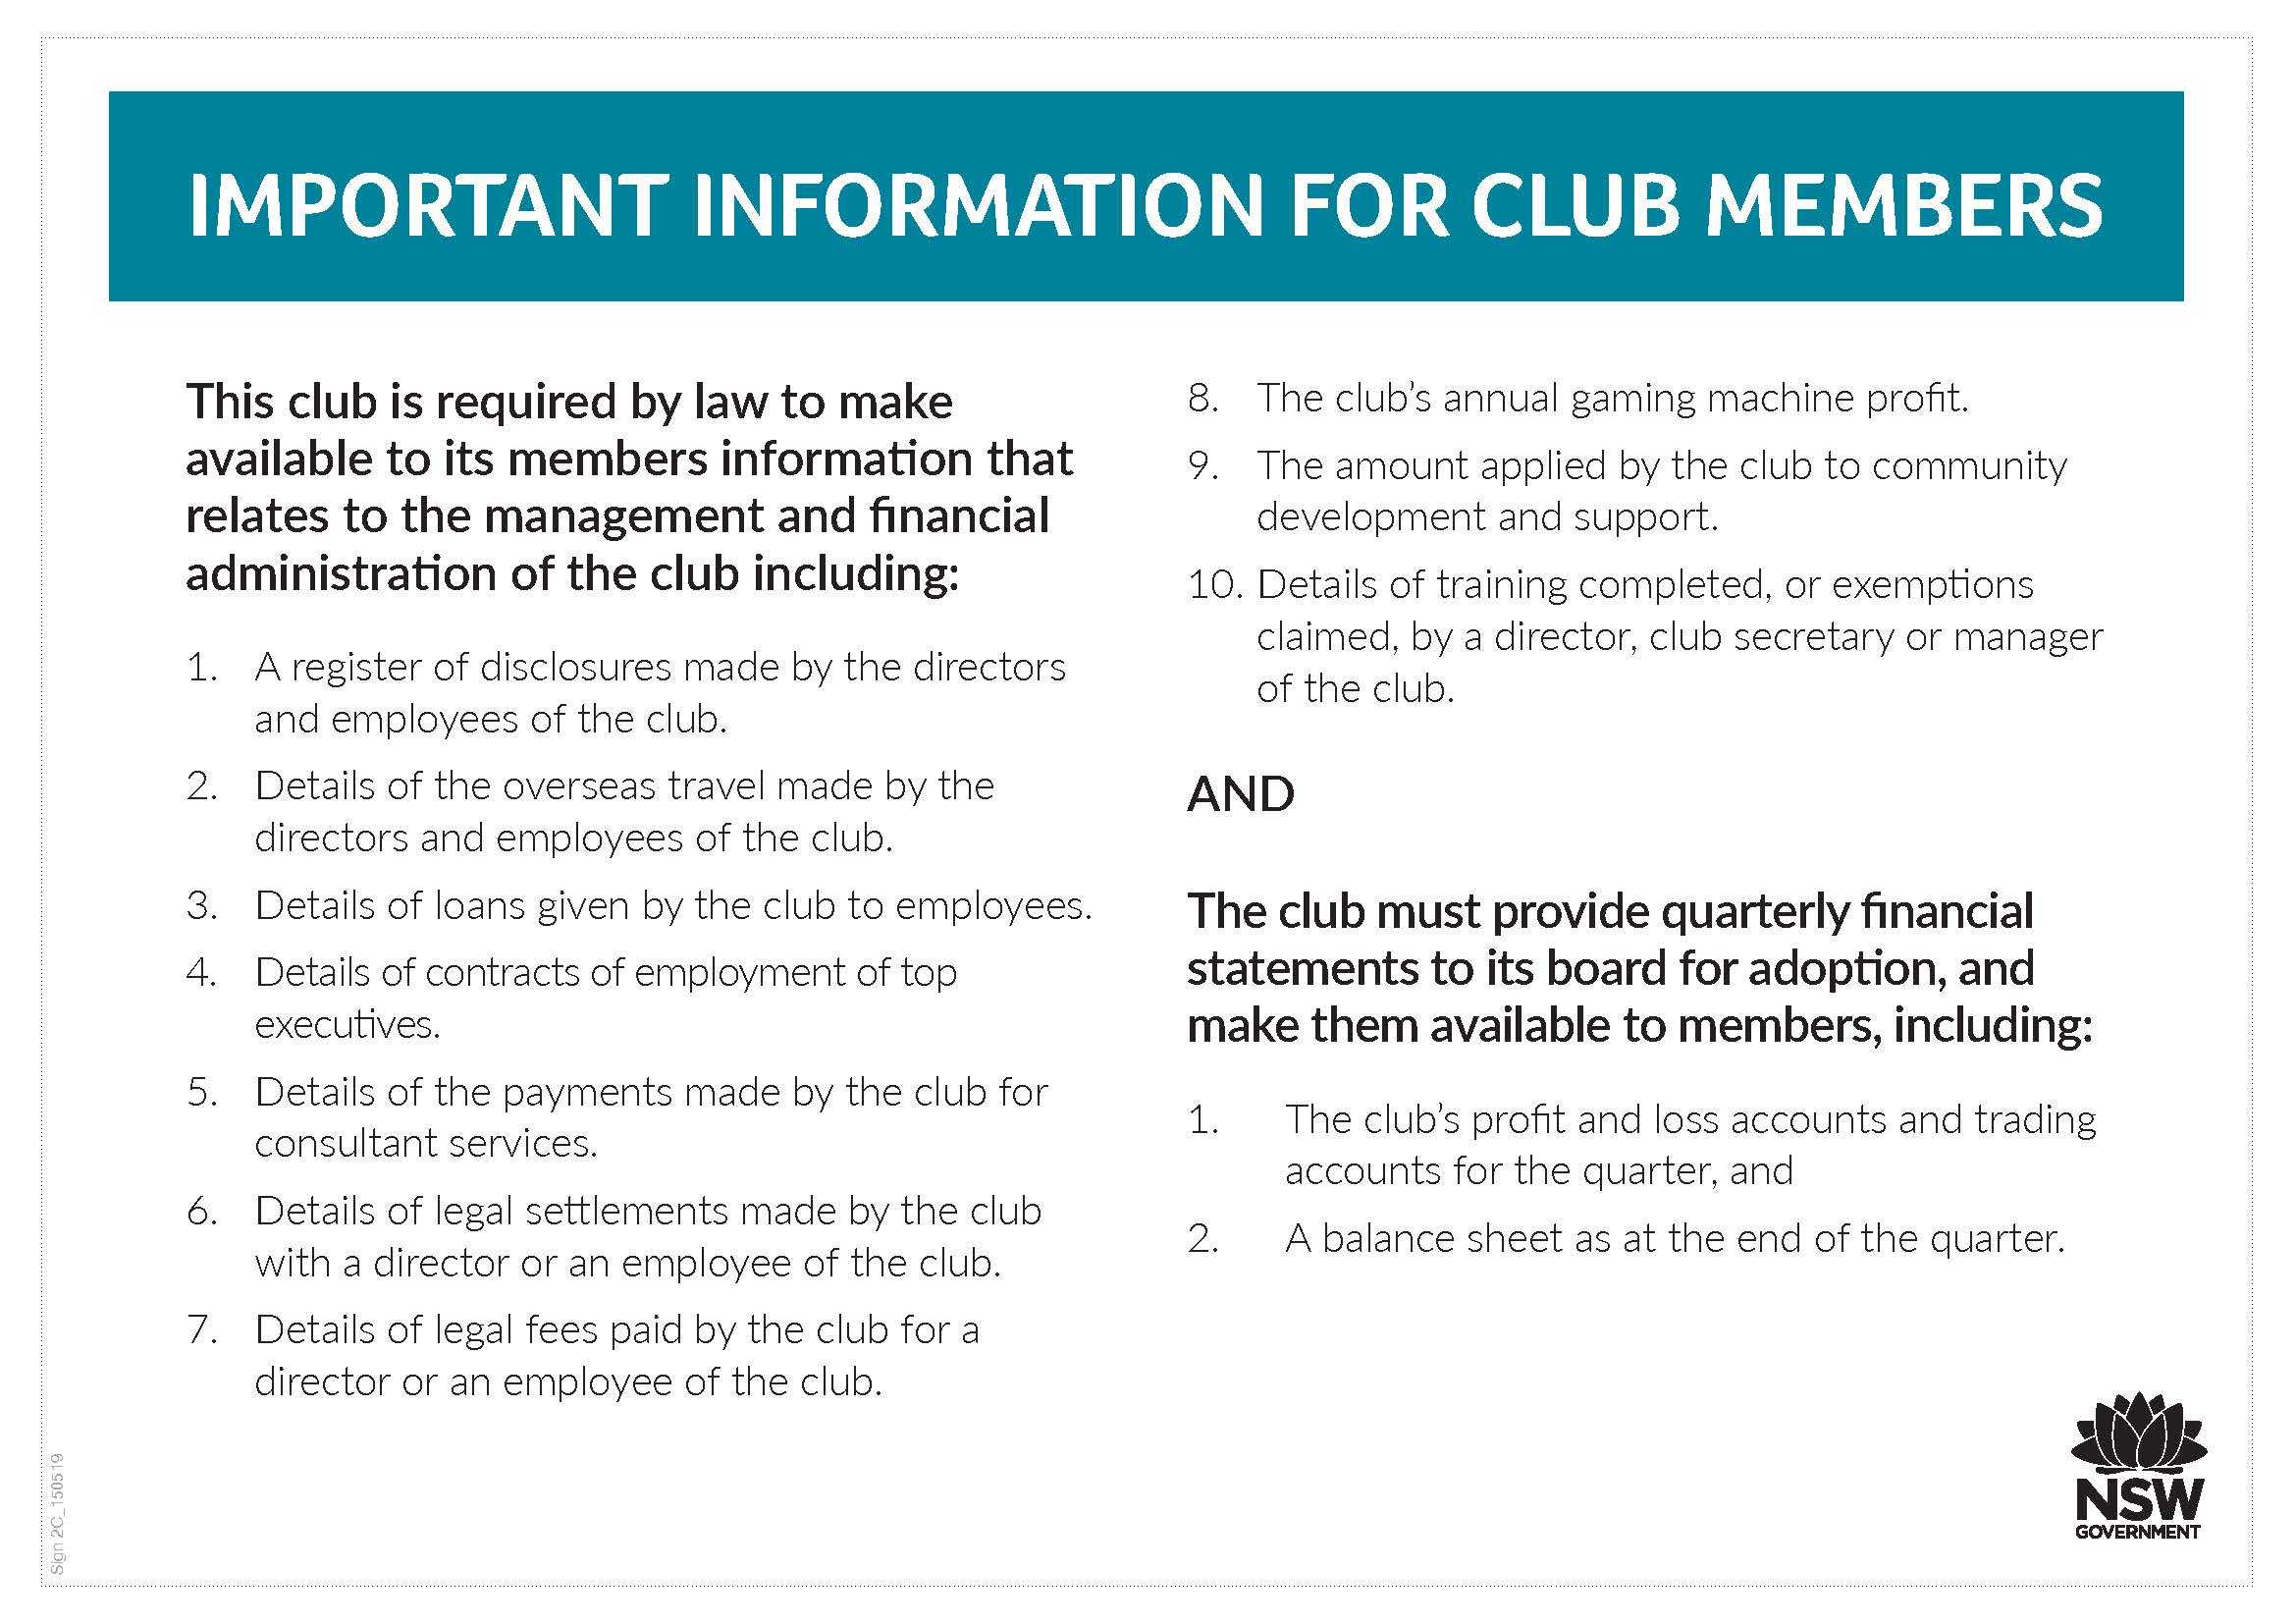 Important-Information-for-Club-Members-Notice.jpg#asset:10142